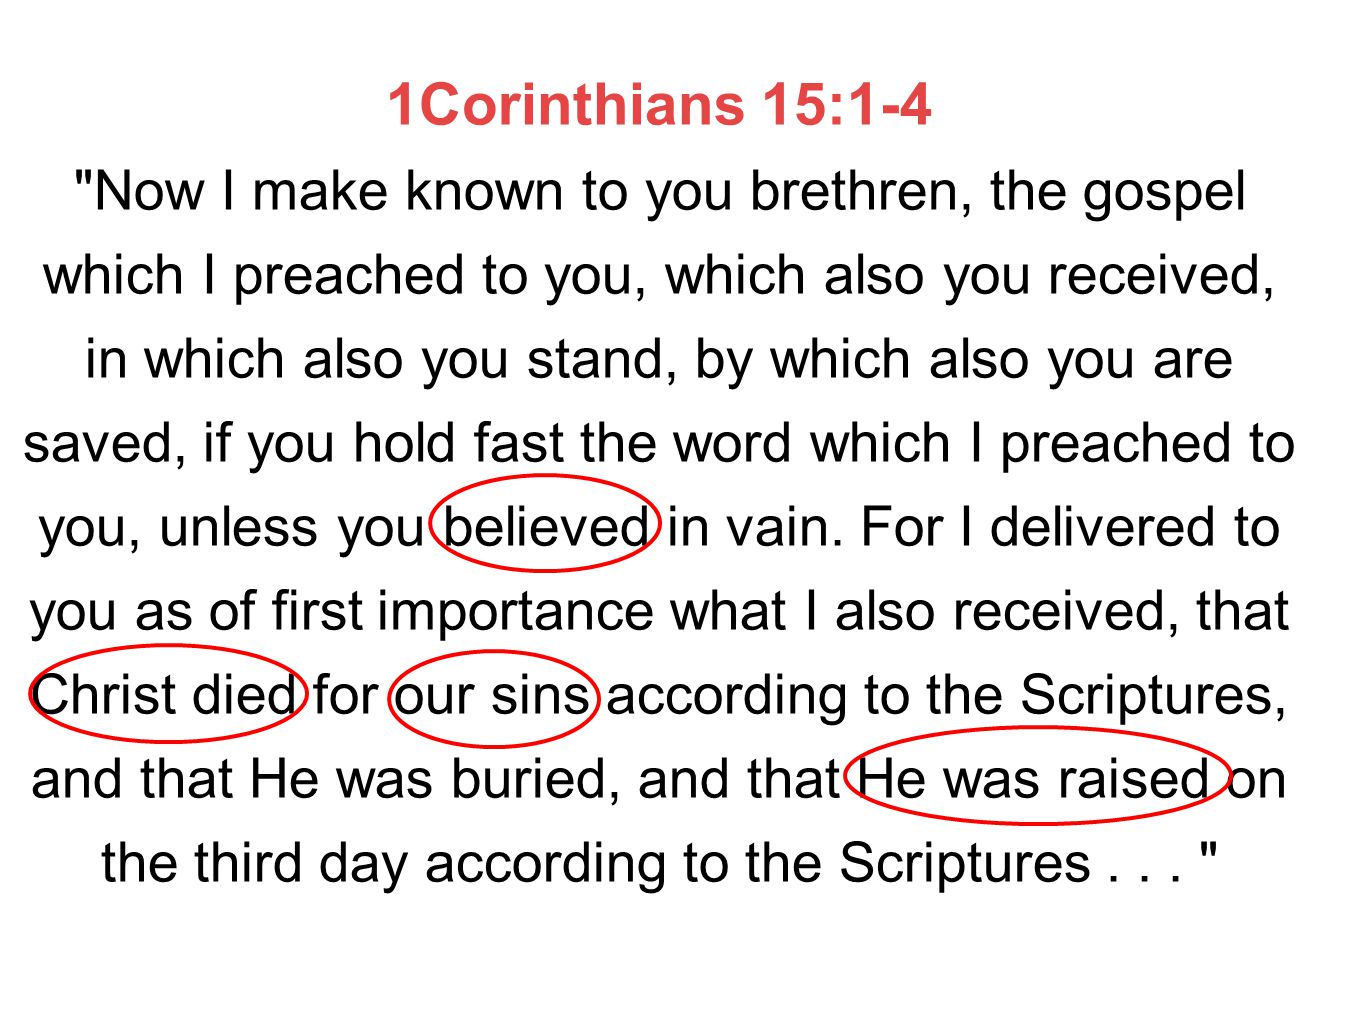 1Corinthians 15:1-4 Now I make known to you brethren, the gospel which I preached to you, which also you received, in which also you stand, by which also you are saved, if you hold fast the word which I preached to you, unless you believed in vain.